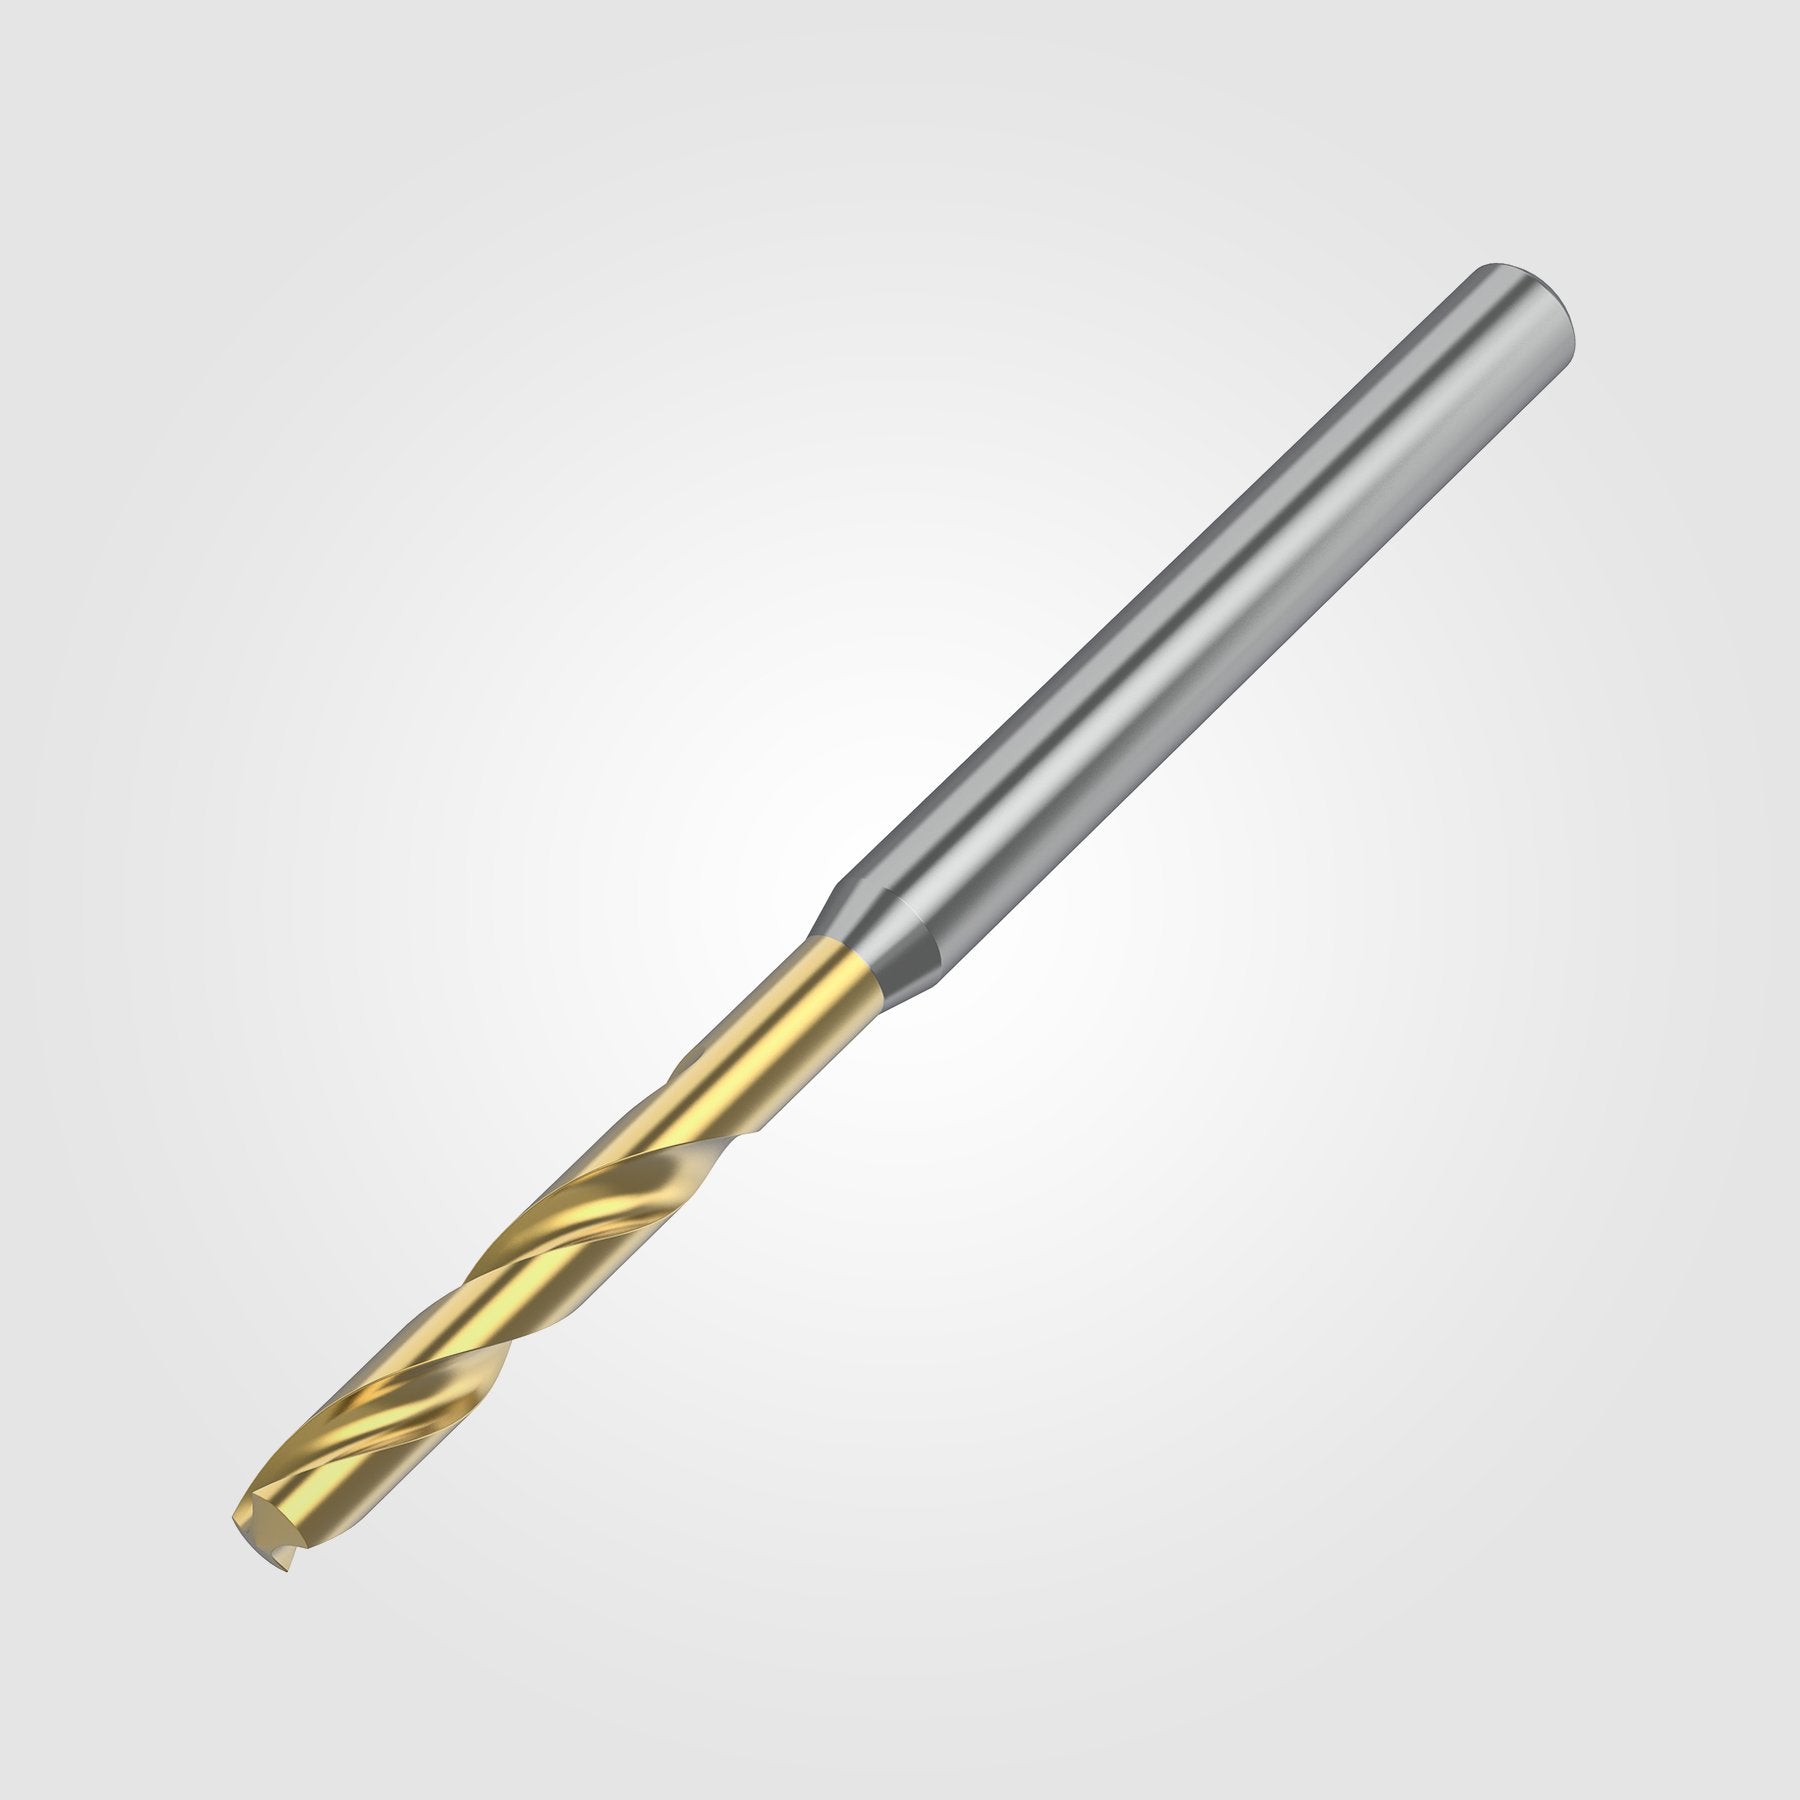 GOdrill (THROUGH COOLANT) | 13.4mm / .5276" / 3xD | SOLID CARBIDE DRILL | 4151245